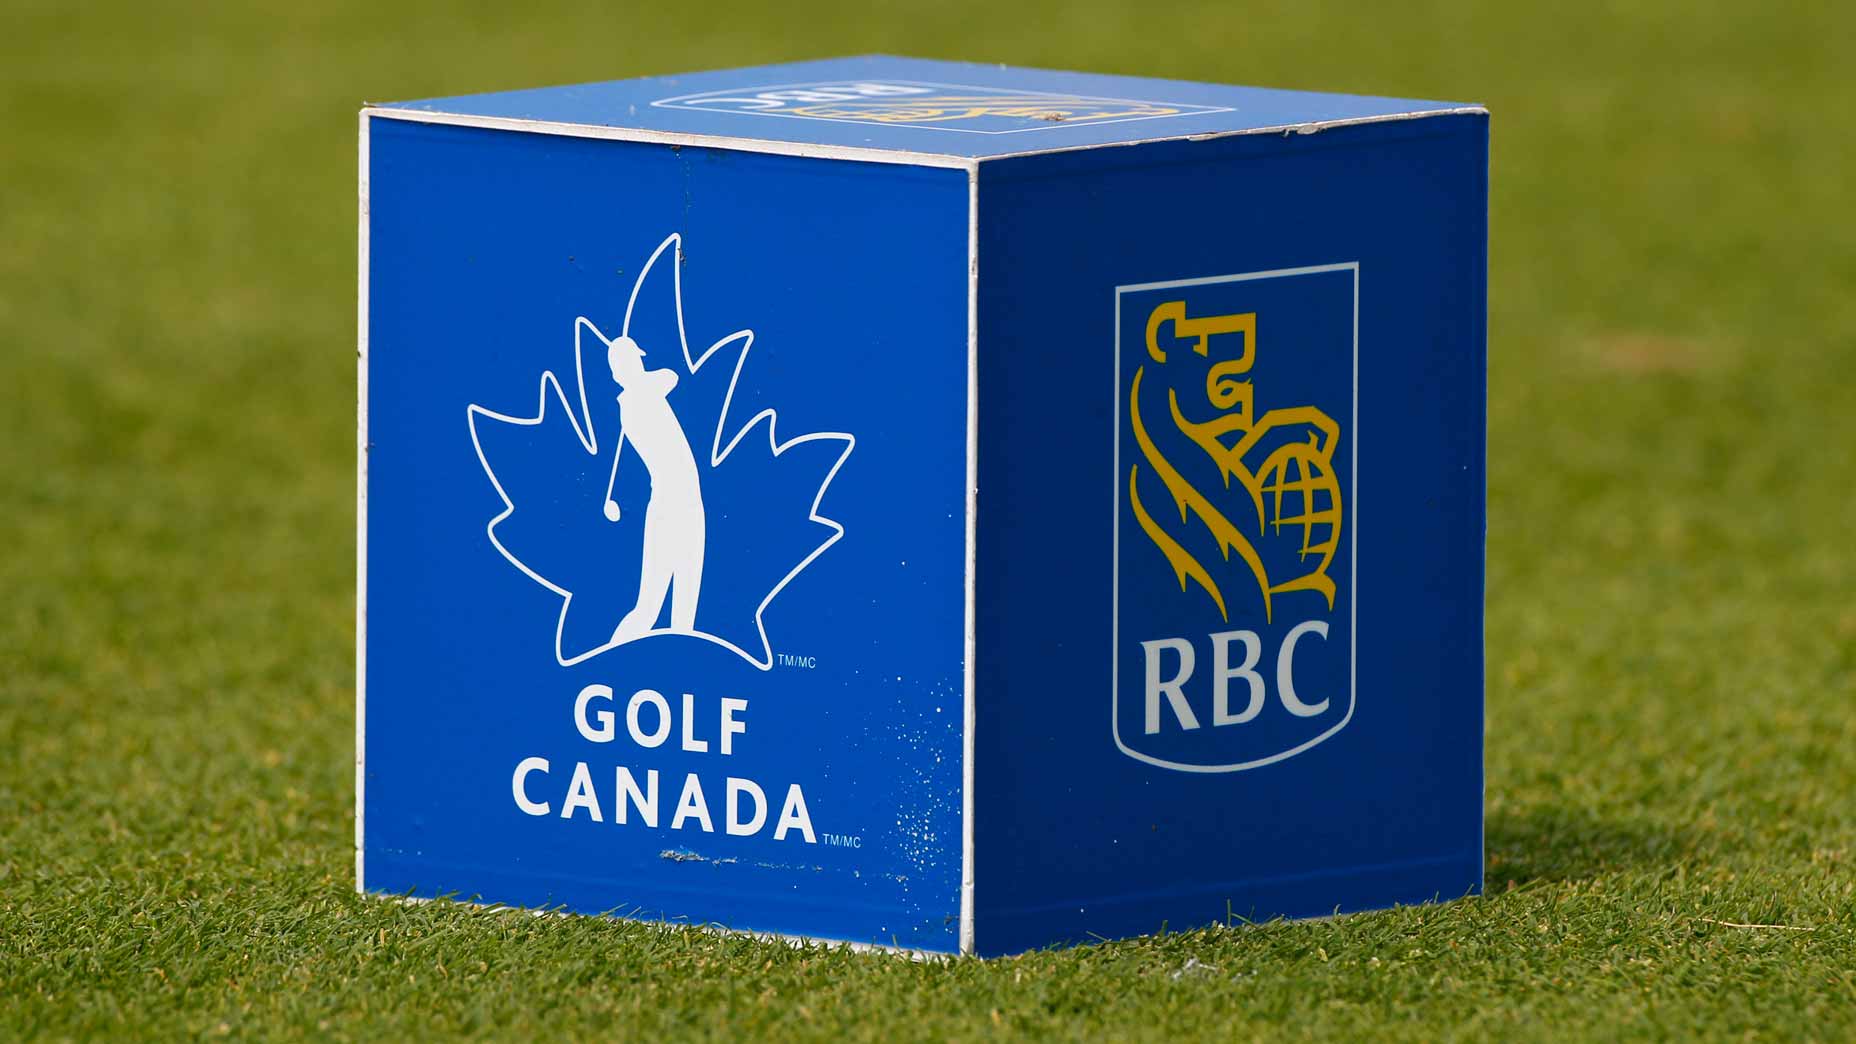 RBC Canadian Open tee marker pictured on tee at tournament